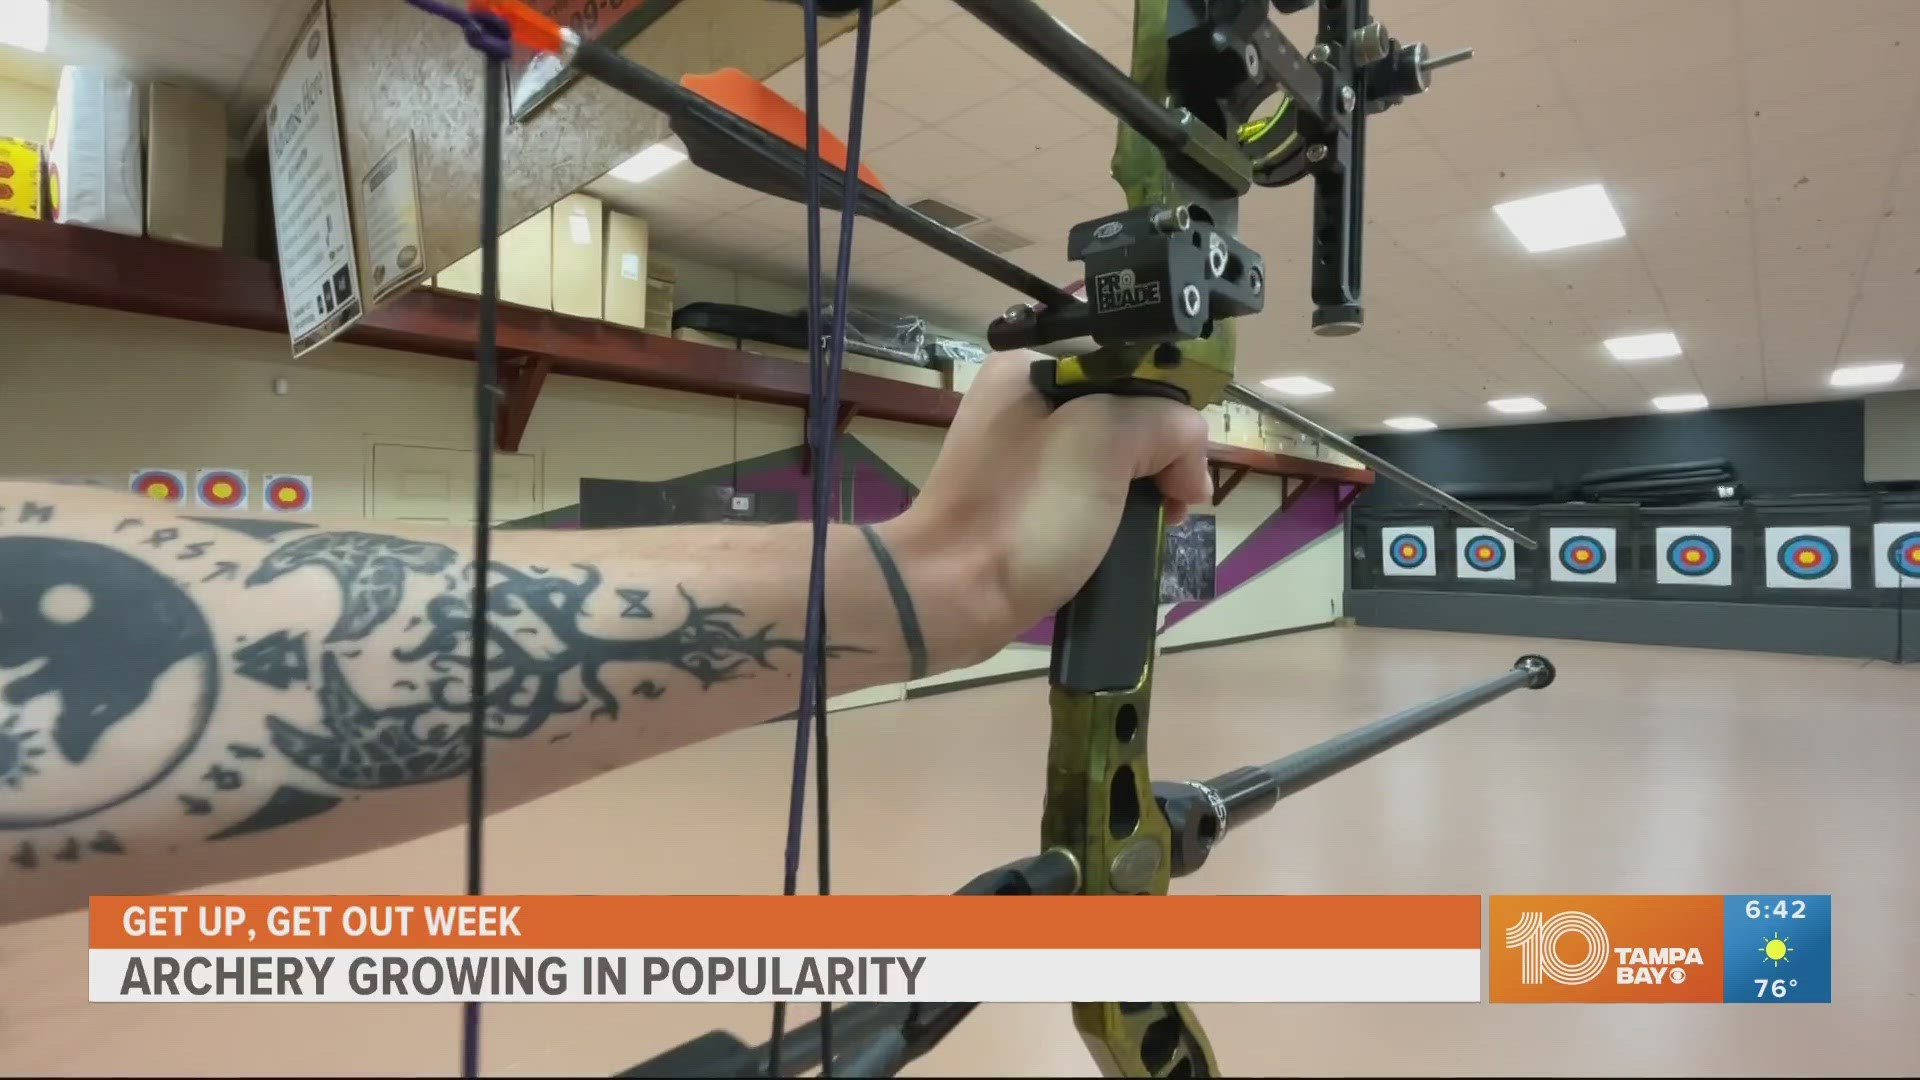 Can You Sell a Compound Bow on Facebook? Find Out Here